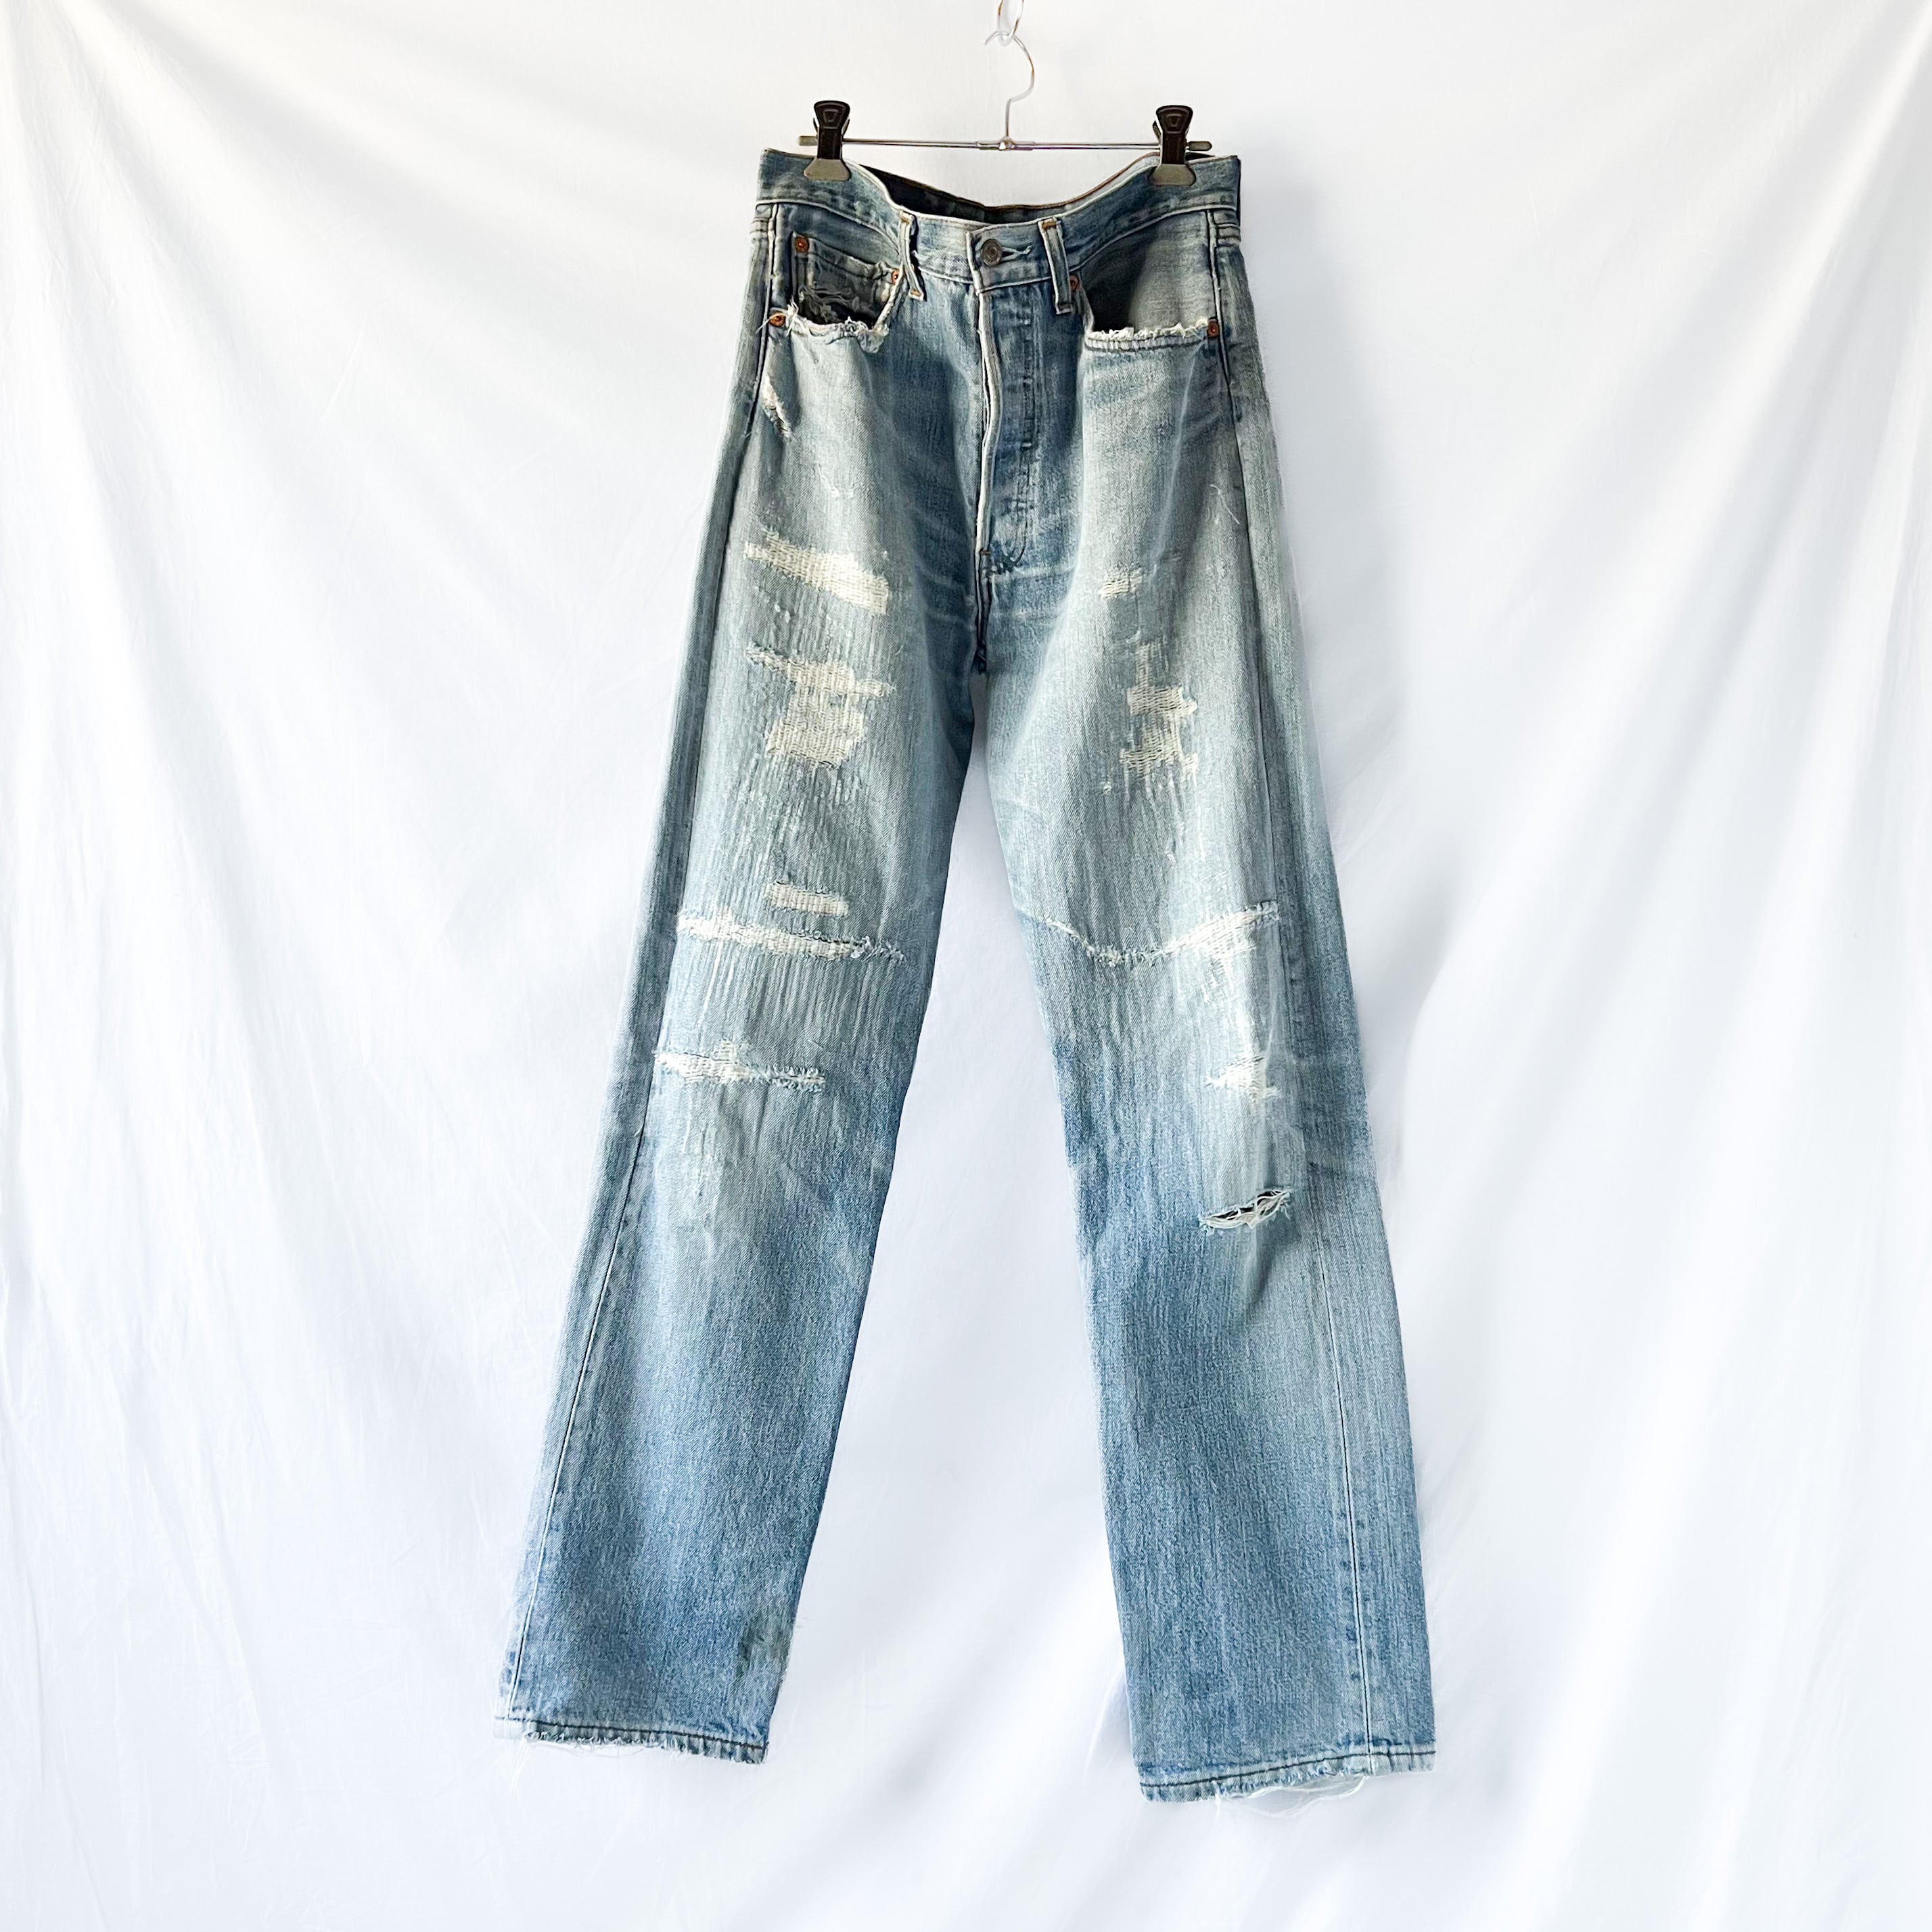 “Levi's 501” made in usa W31L32 ボタン裏553 00年7月製造 ...